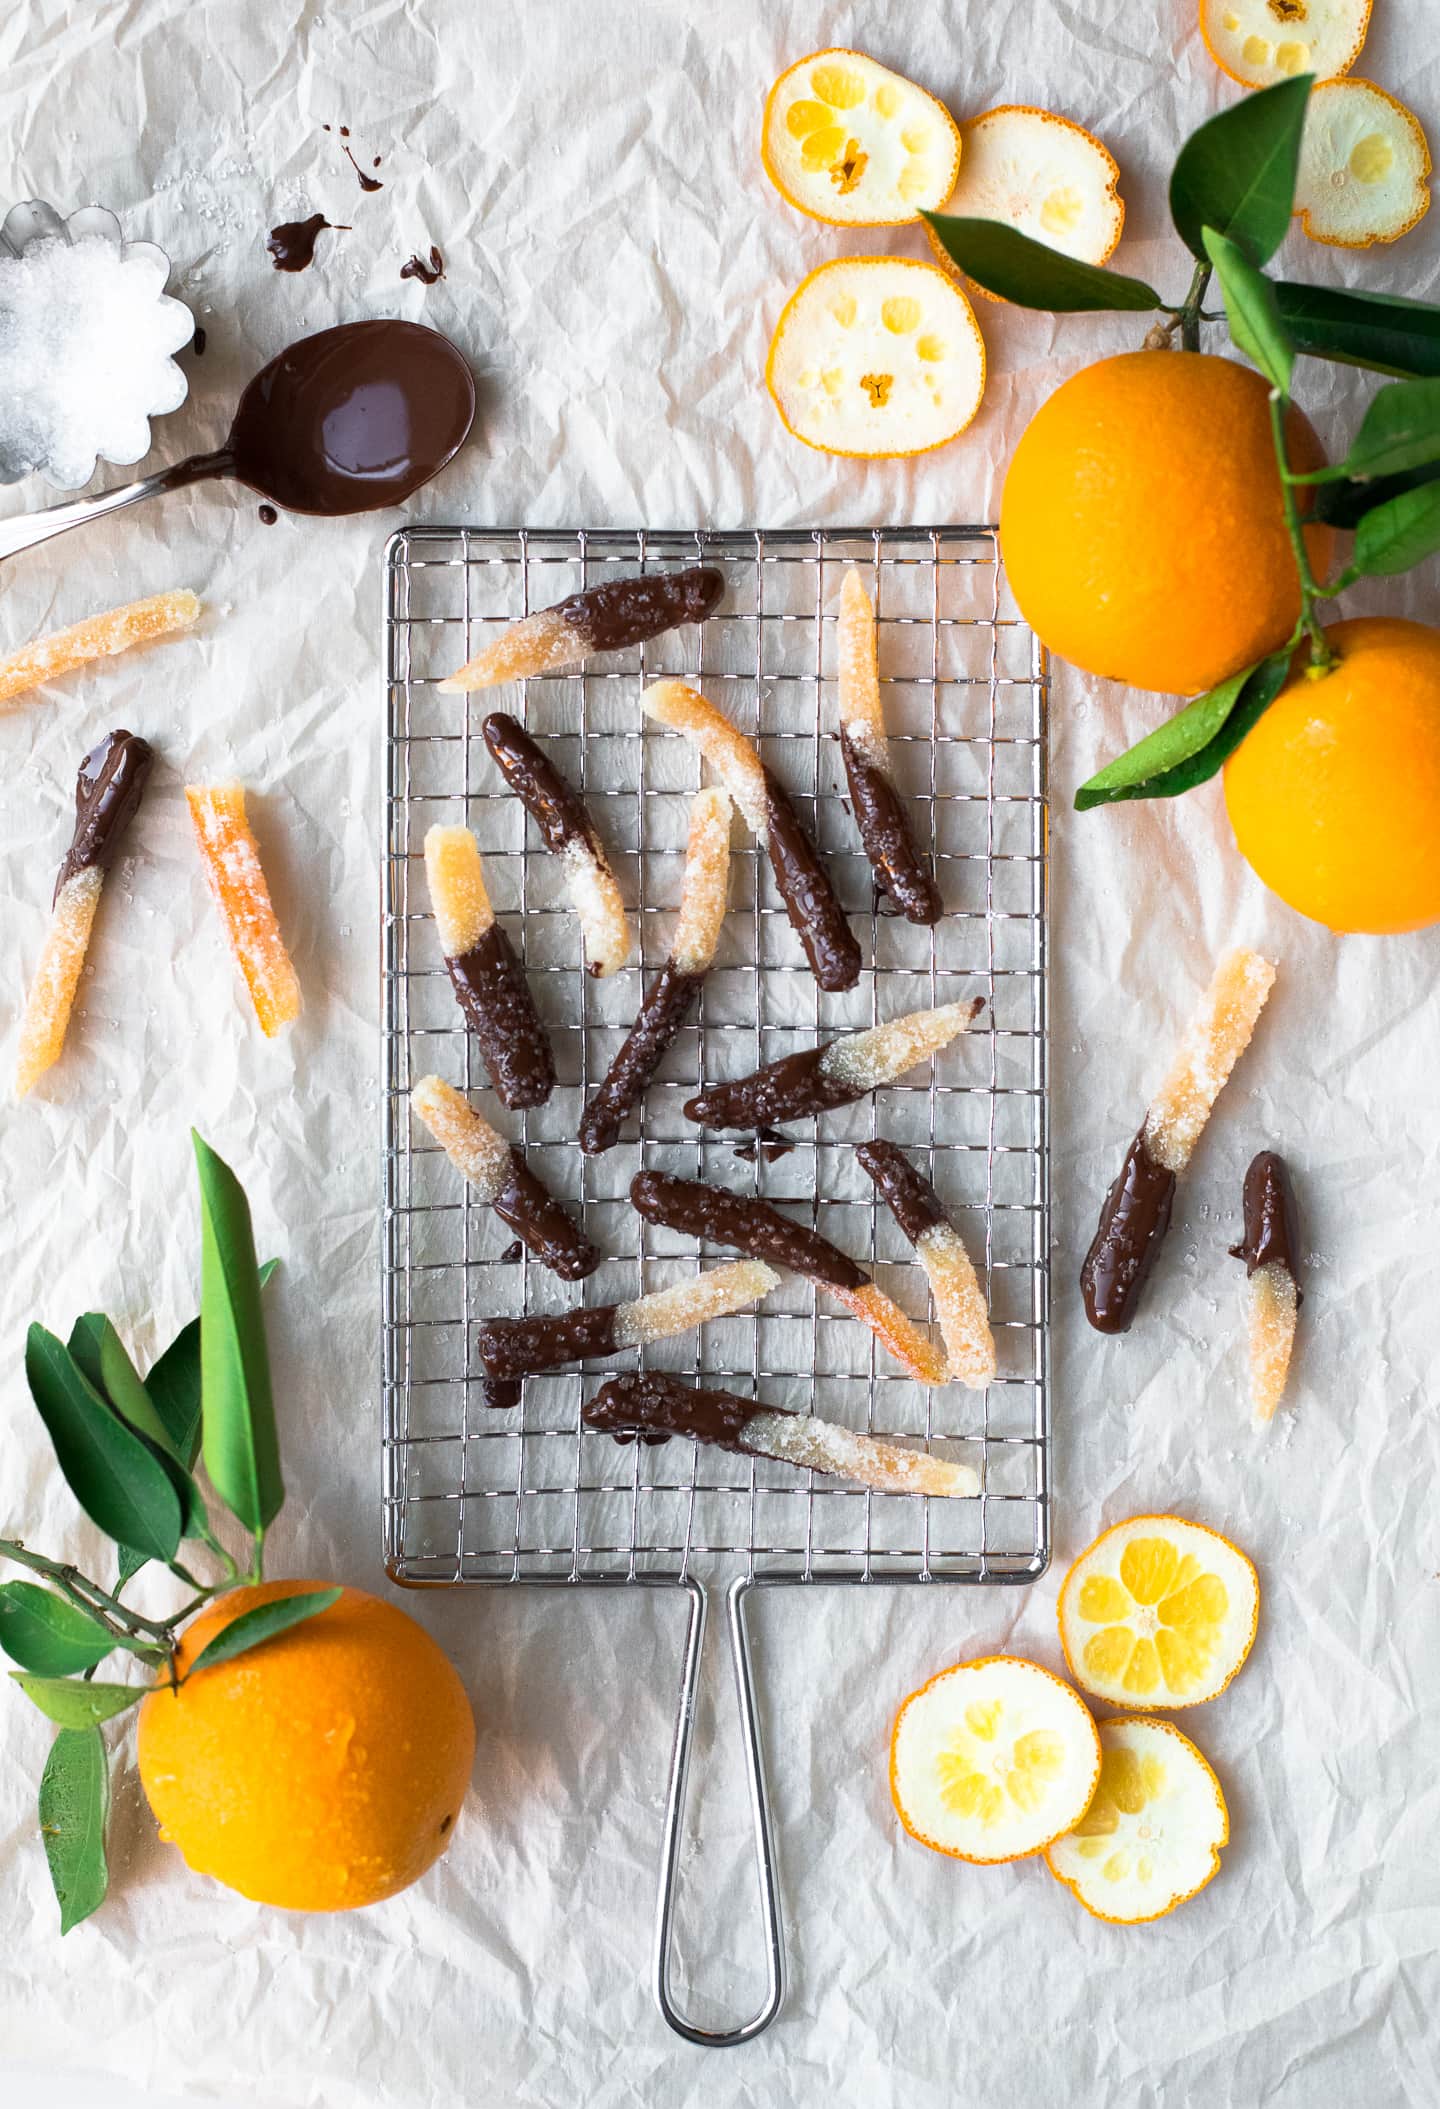 Overhead view of strips of chocolate-dipped candied orange peel on a safety grater, surrounded by more oranges and peel cuttings.